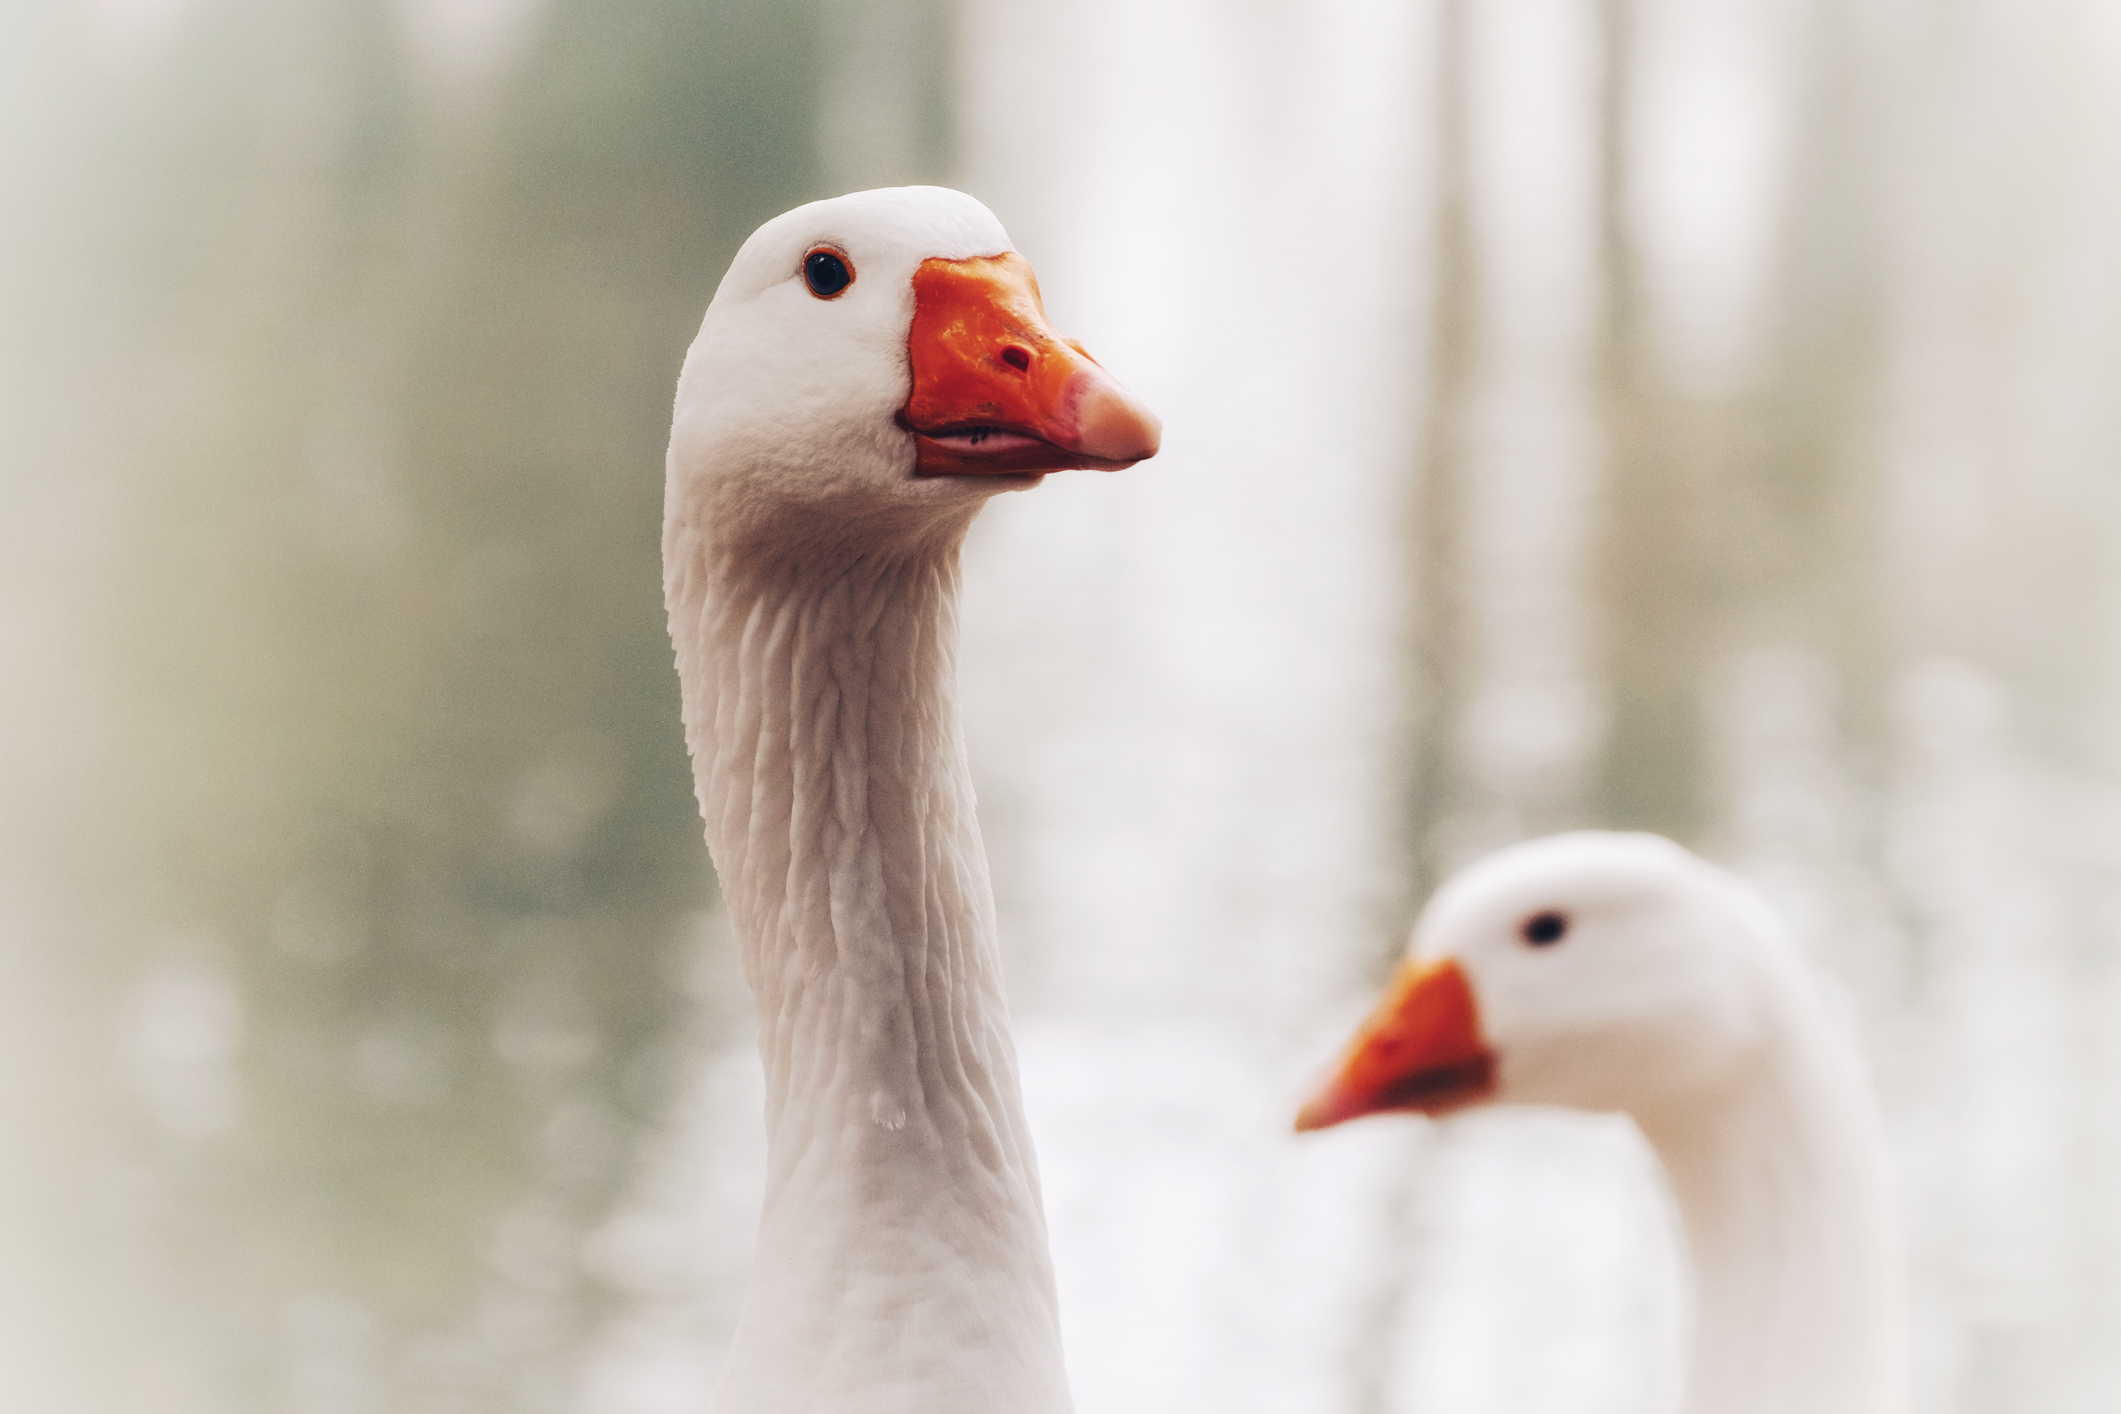 Two geese close-up with one in the foreground looking directly at the camera